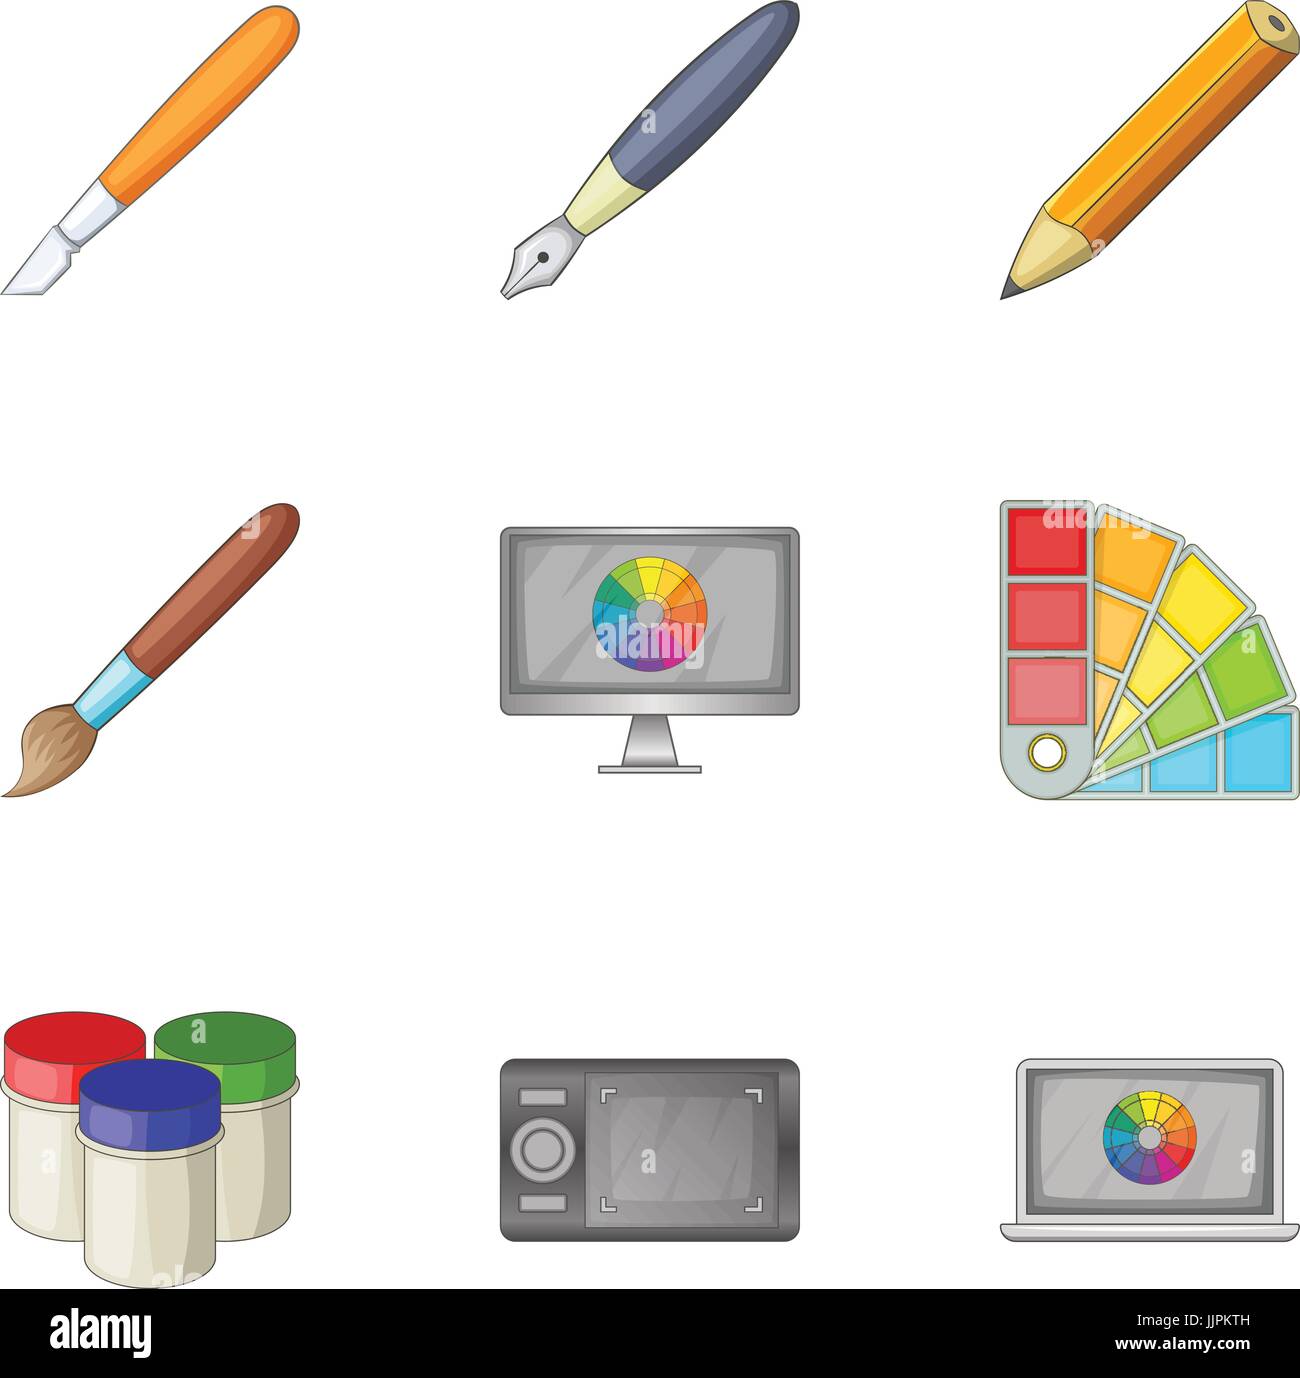 Computer drawing tool icons set cartoon style Vector Image